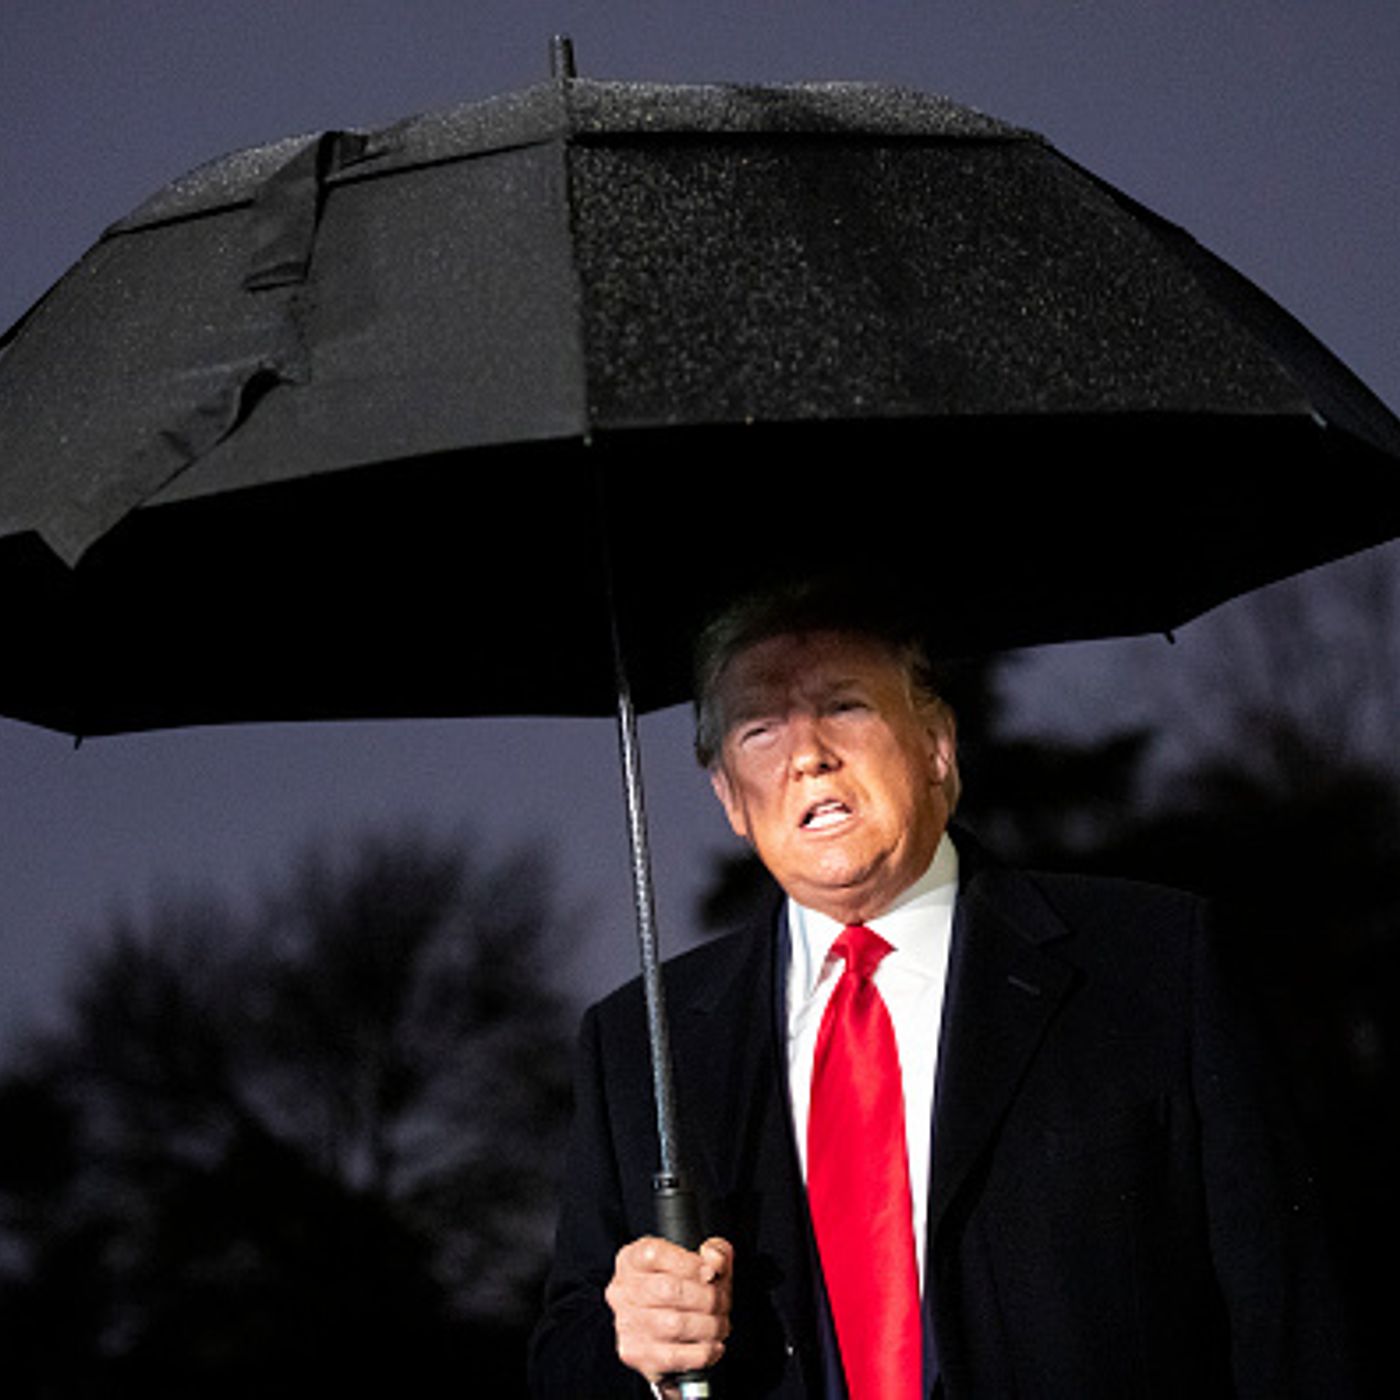 Can Trump weather the impeachment storm?